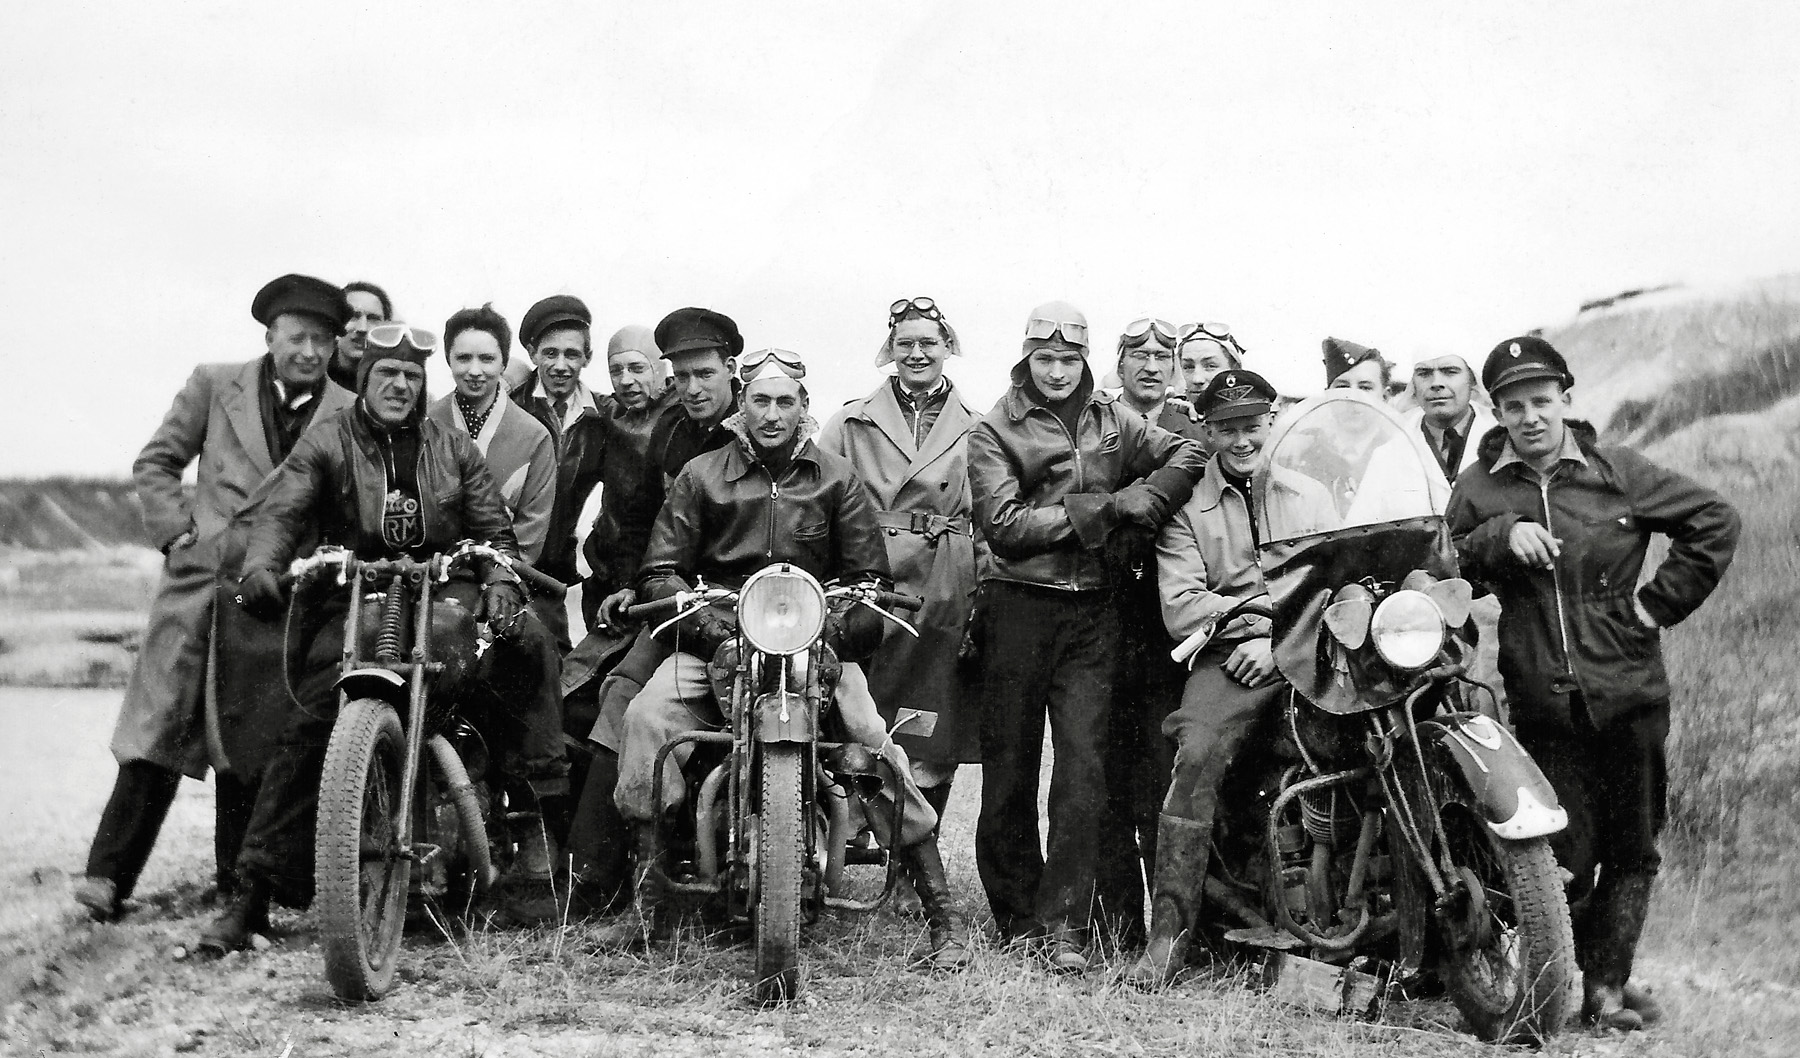 Winnipeg Roughriders Motorcycle Club at a hill climb near Miami Mb. about 1945. View full size.